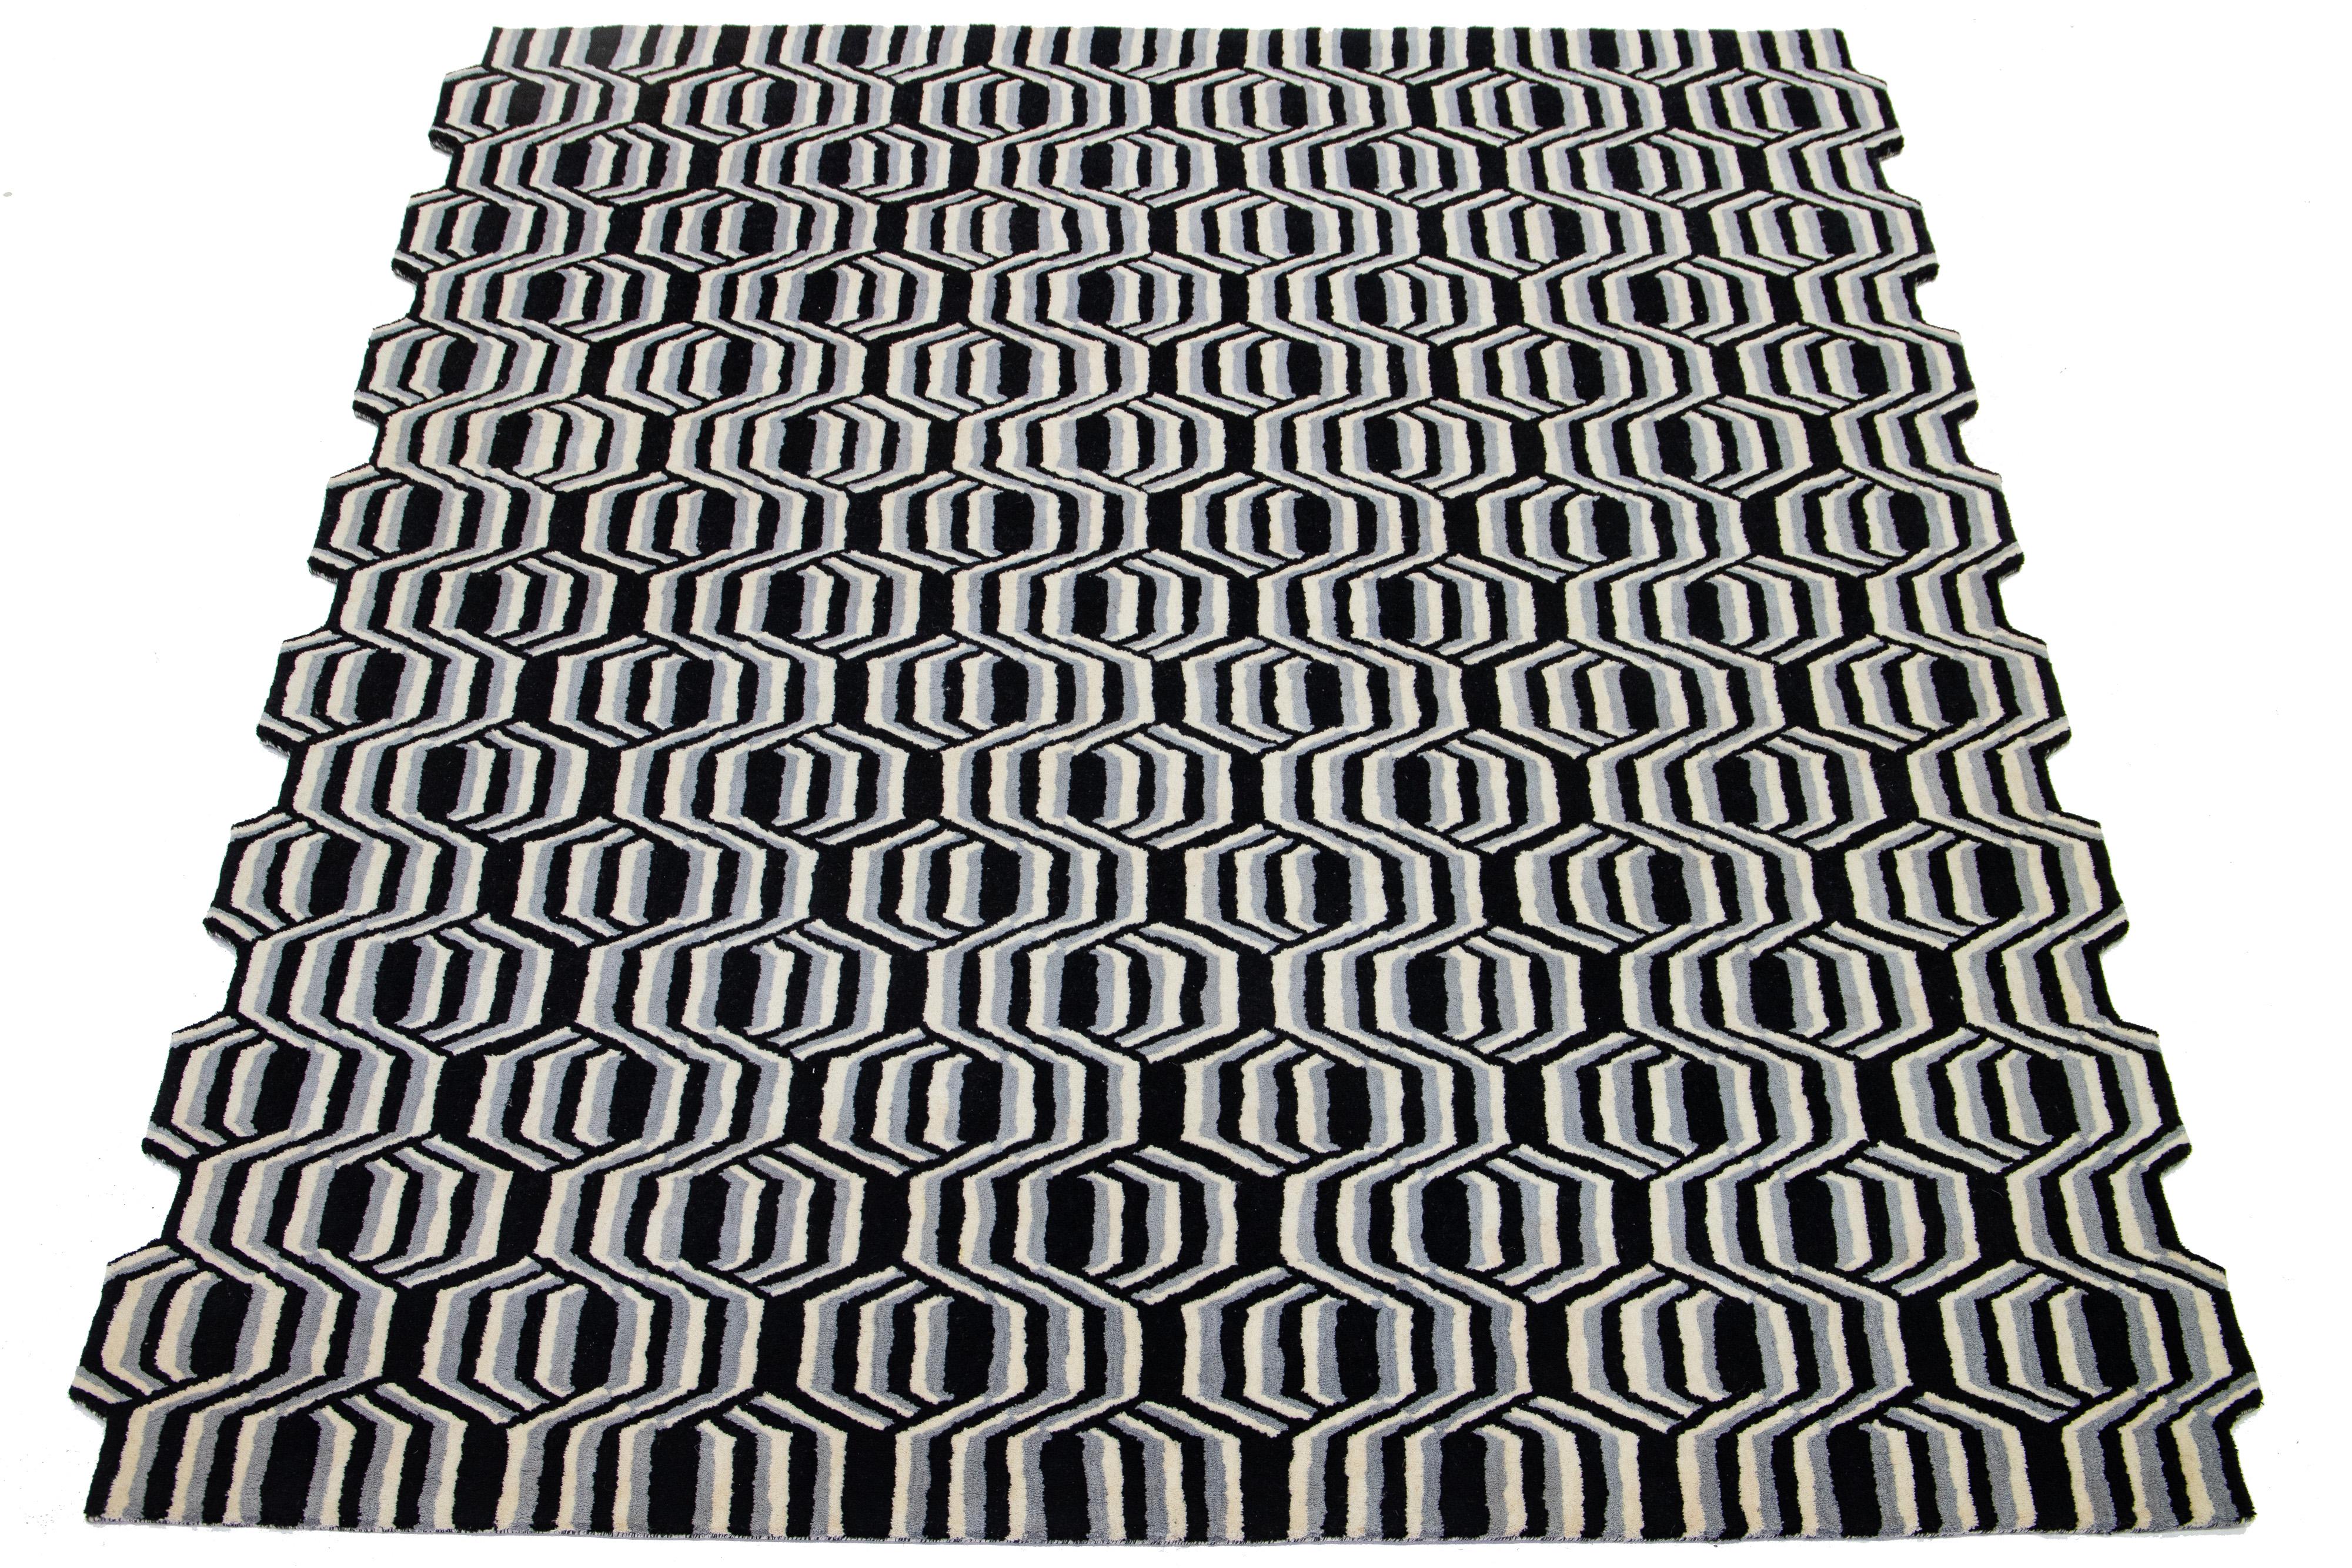 This beautiful, modern hand-tufted wool rug part of our Laura Gottwald for Apadana Collection features gray, black, and ivory fields. This Freestyle design: Overlapping hexagons create Freestyle’s crisp, quirky graphic pattern. 
People unconsciously